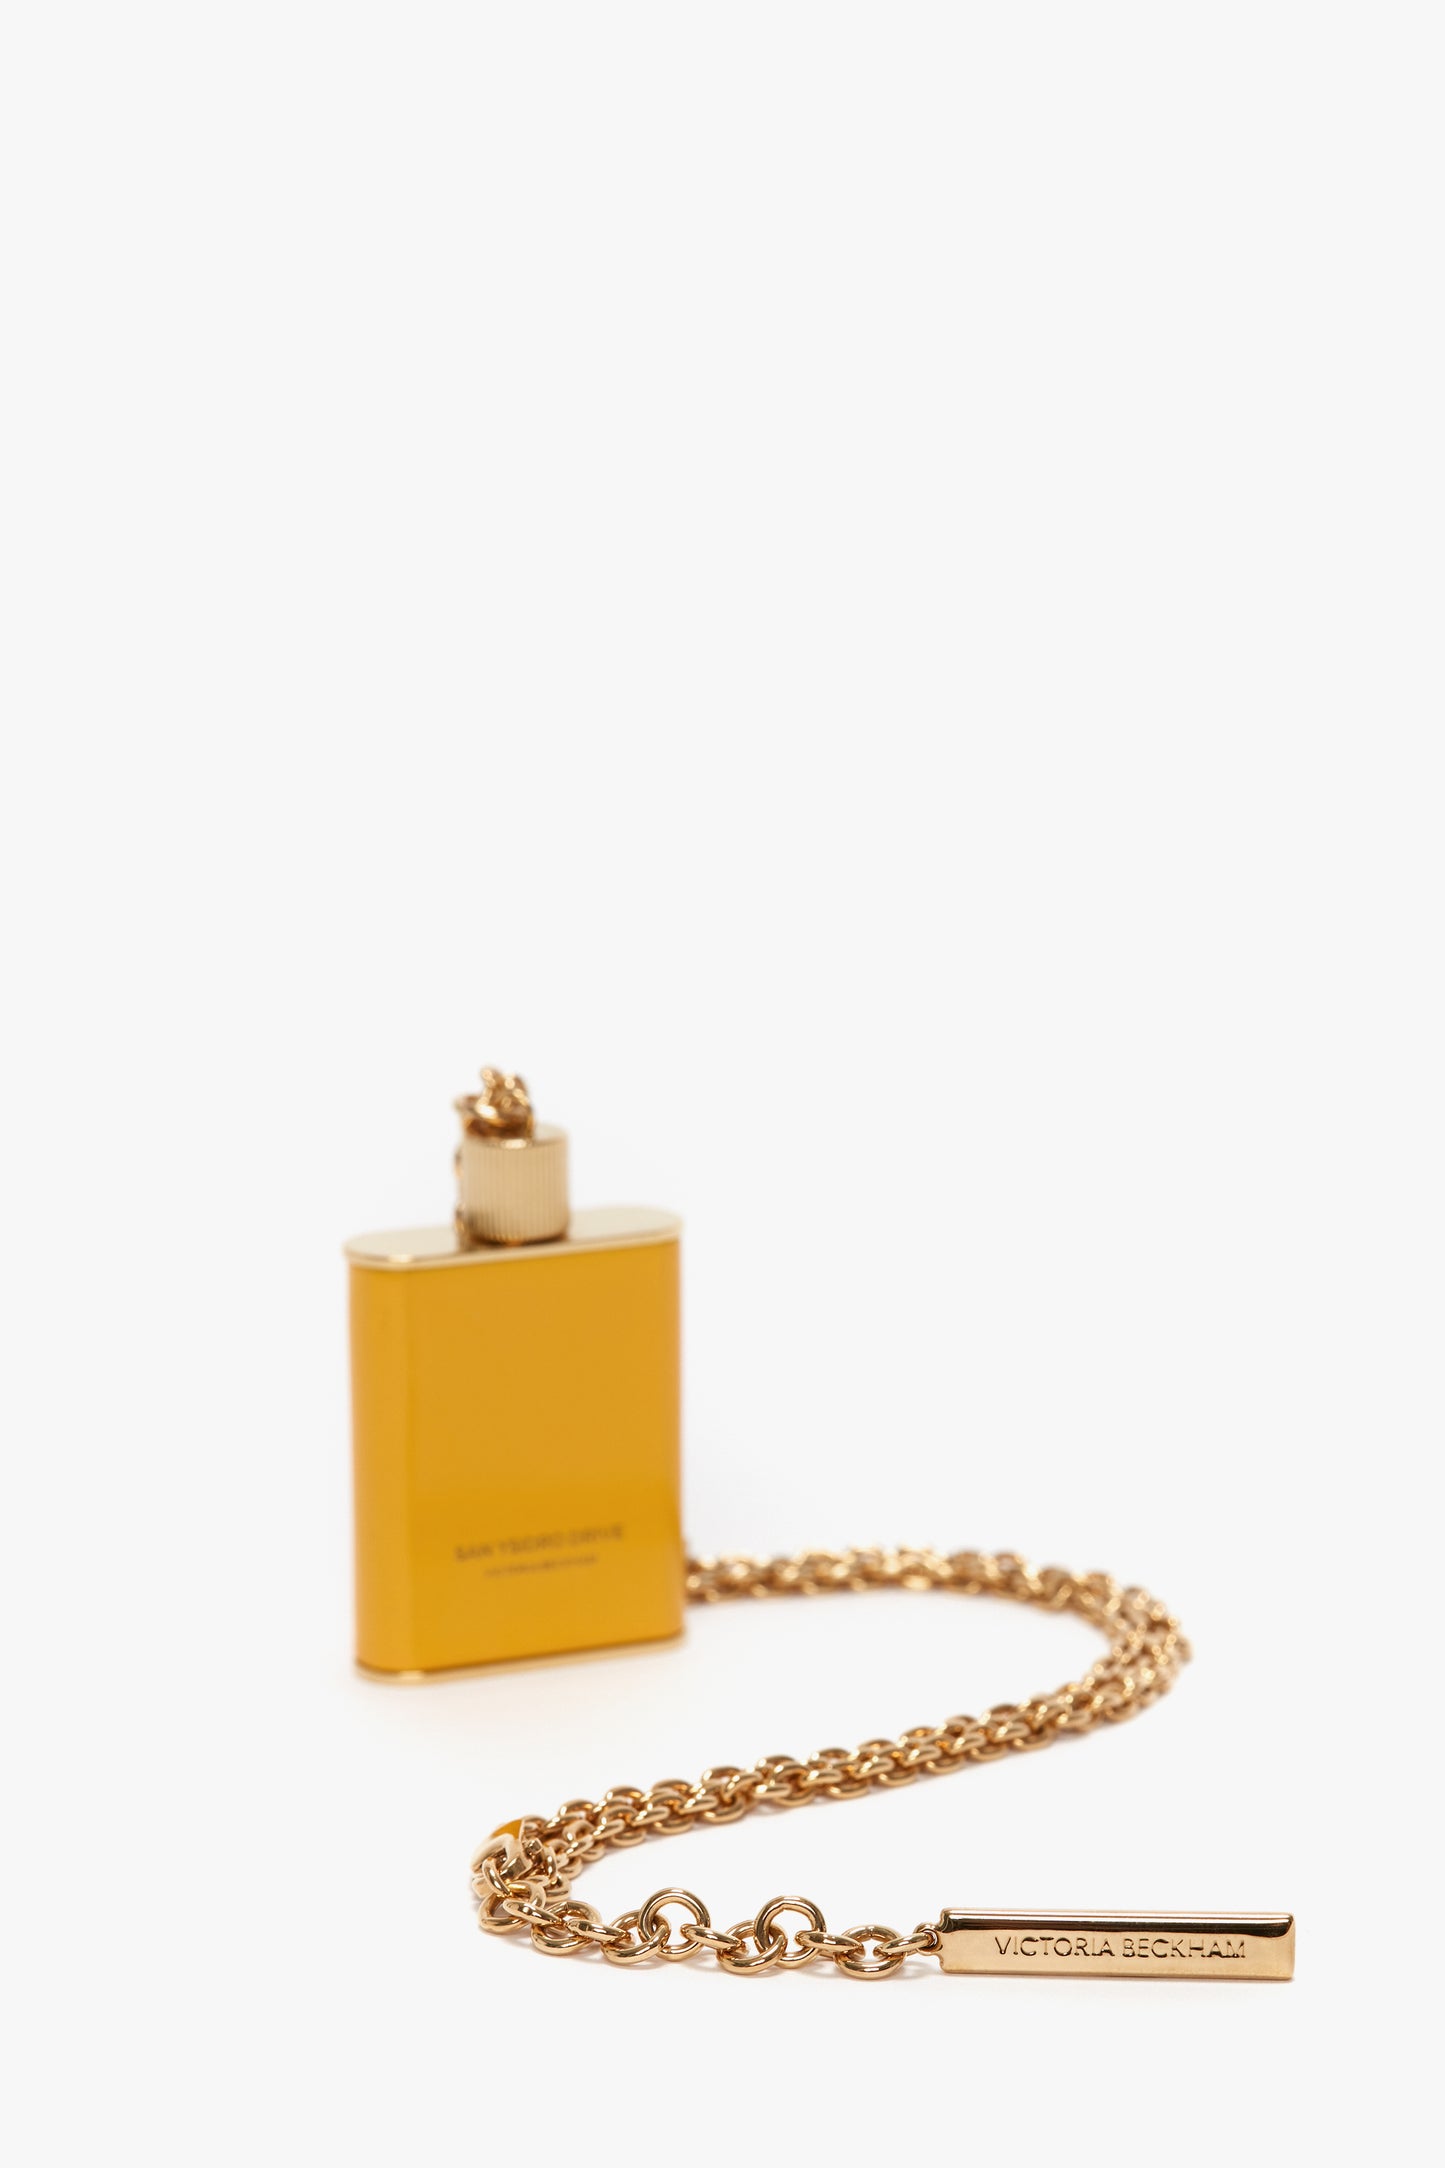 A golden, rectangular lighter with an attached chain and a tag inscribed with "Victoria Beckham" exudes elegance. The gold brushed brass finish perfectly complements the Victoria Beckham branding, making it a luxurious accessory.